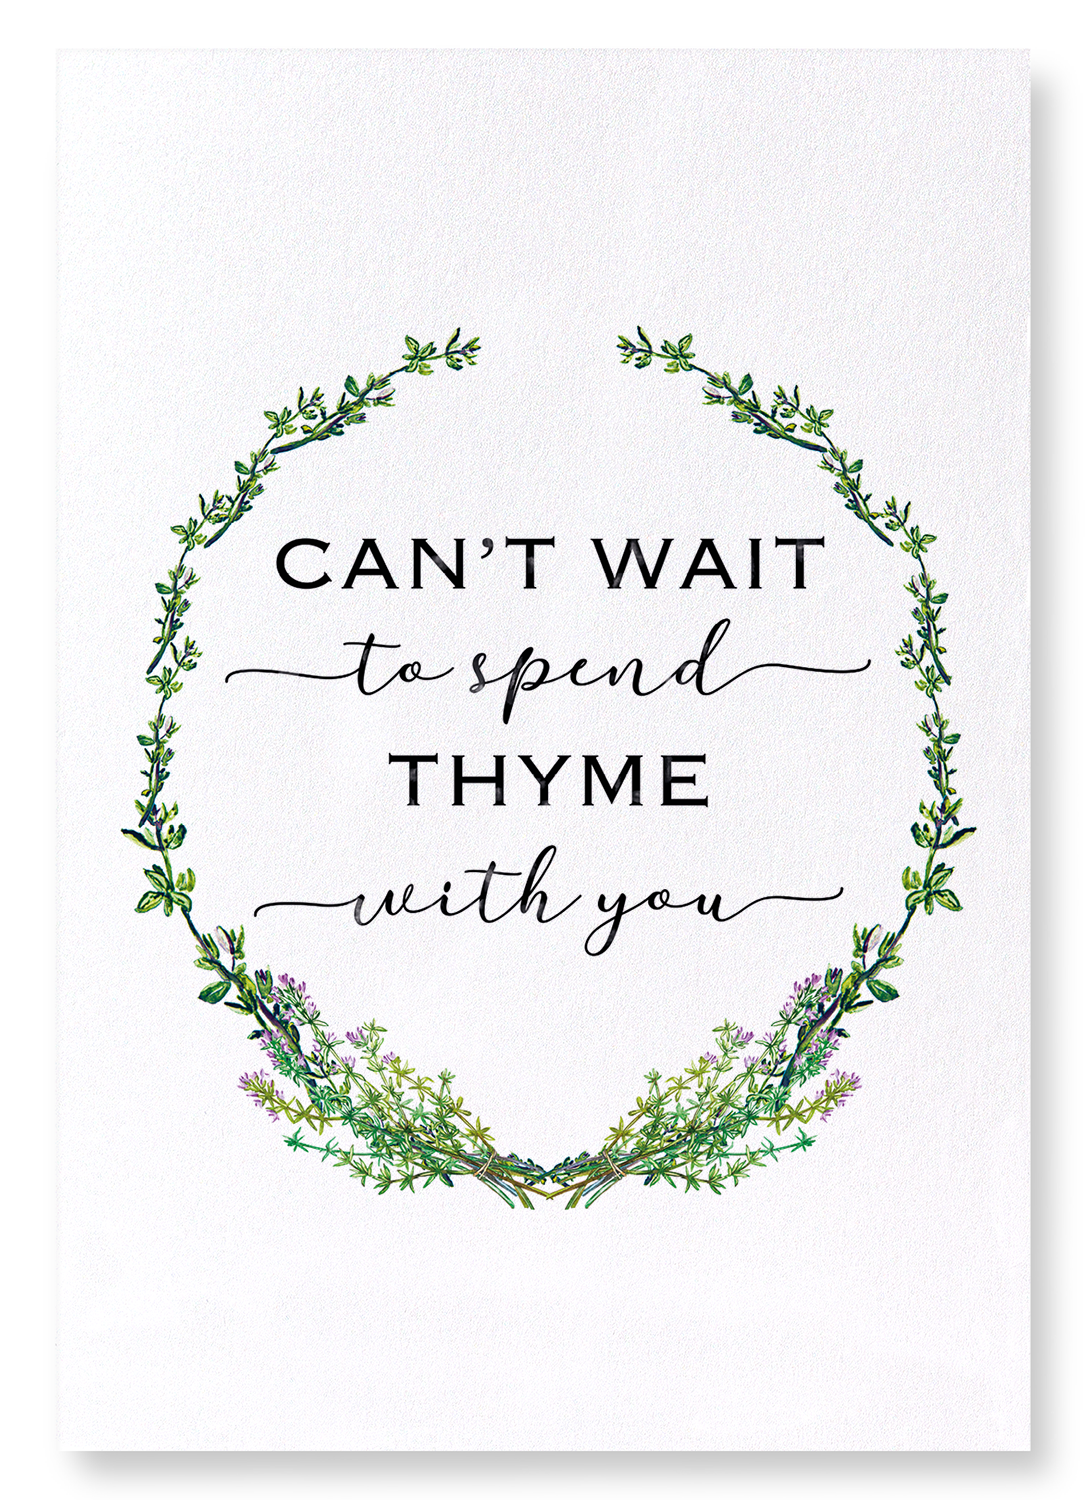 SPEND THYME WITH YOU: Watercolour Art Print